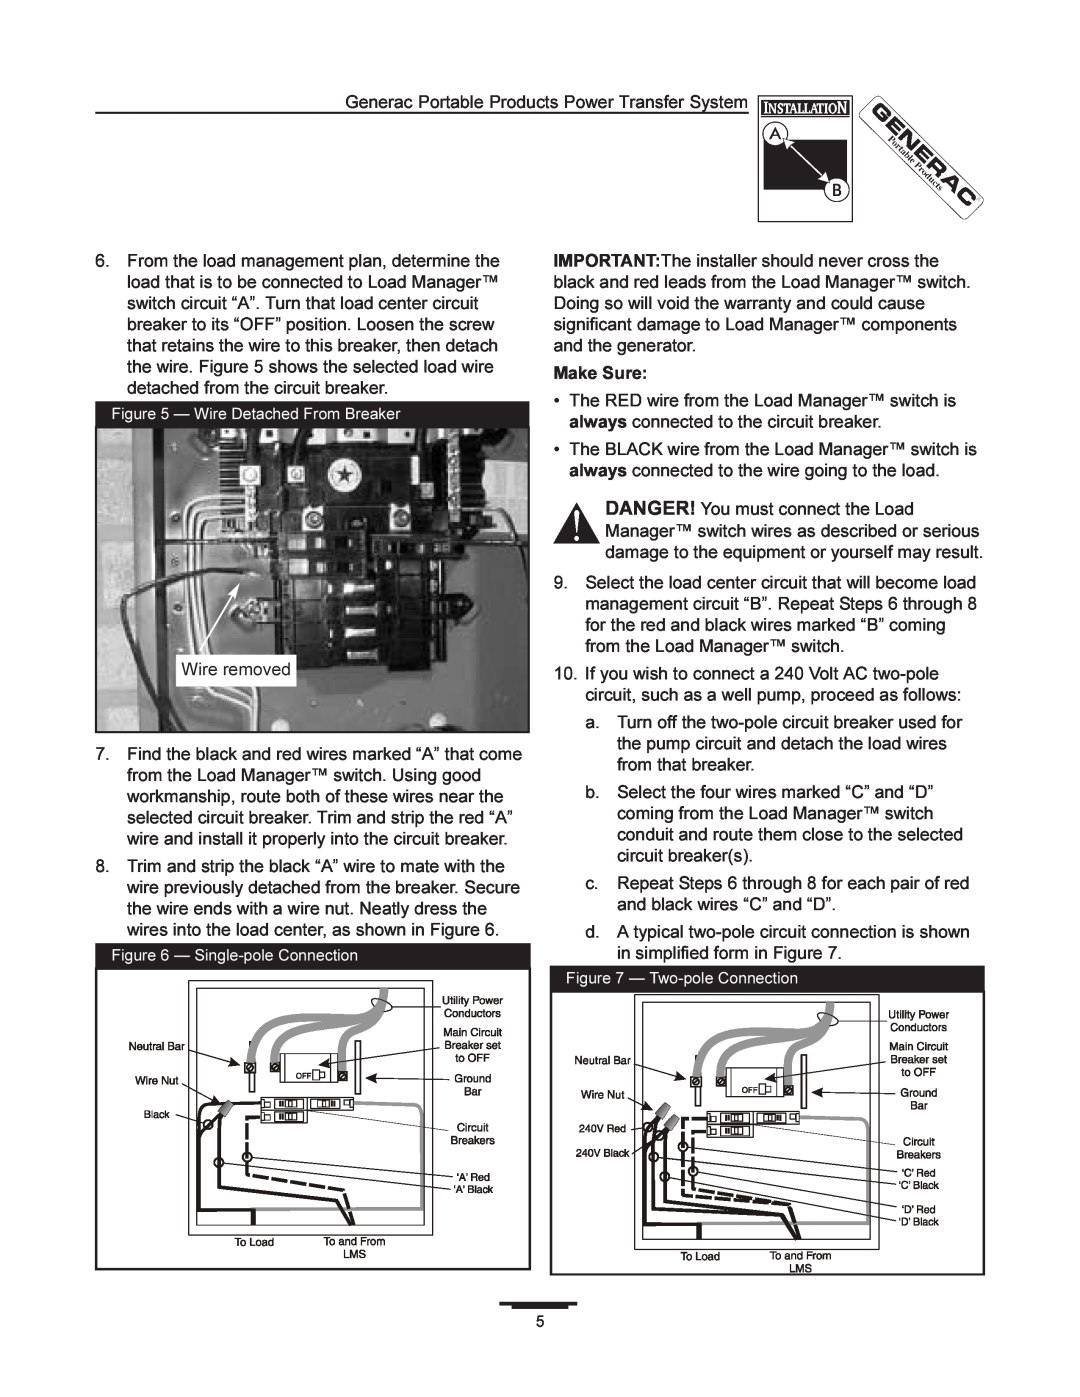 Generac 1403-0 manual Make Sure, Wire Detached From Breaker, Single-pole Connection, Two-pole Connection 